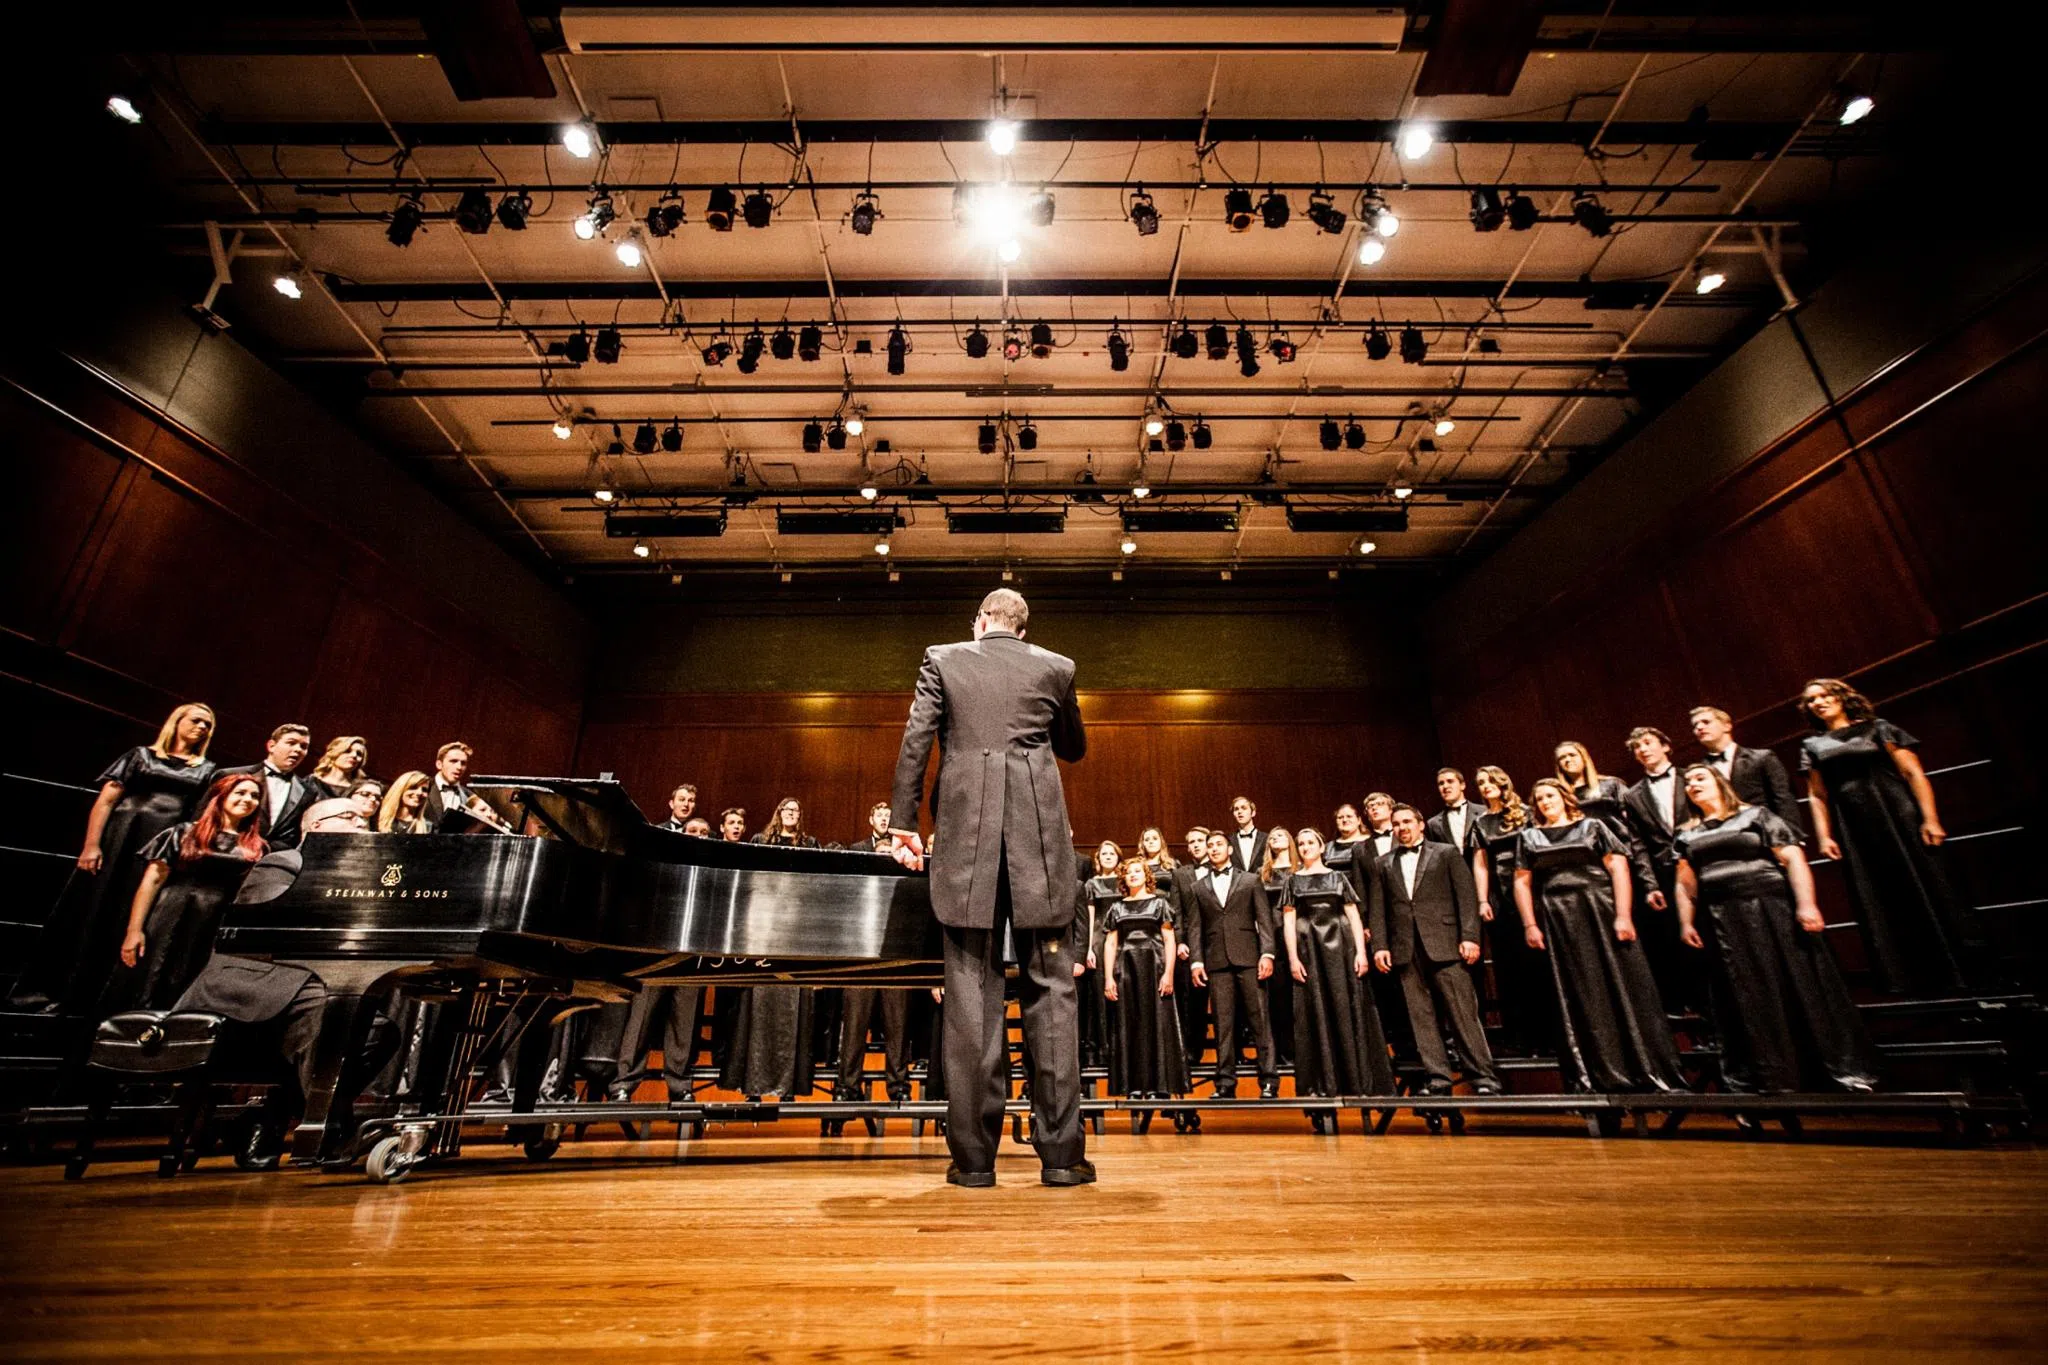 Conductor stands in front of a choir while they sing. The conductor's back is to the audience